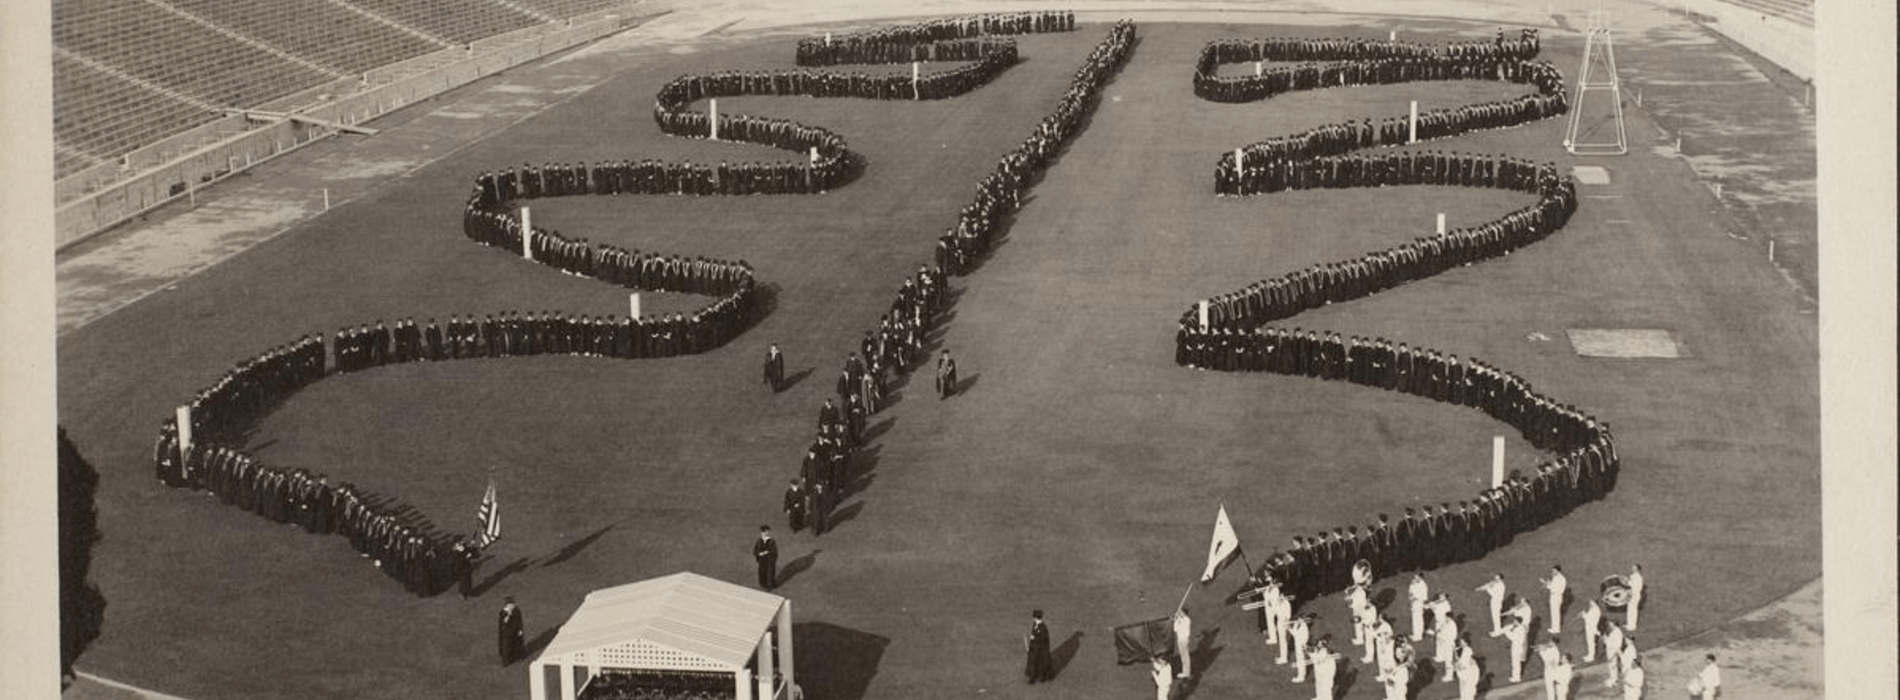 USC Commencement at the Coliseum in 1926